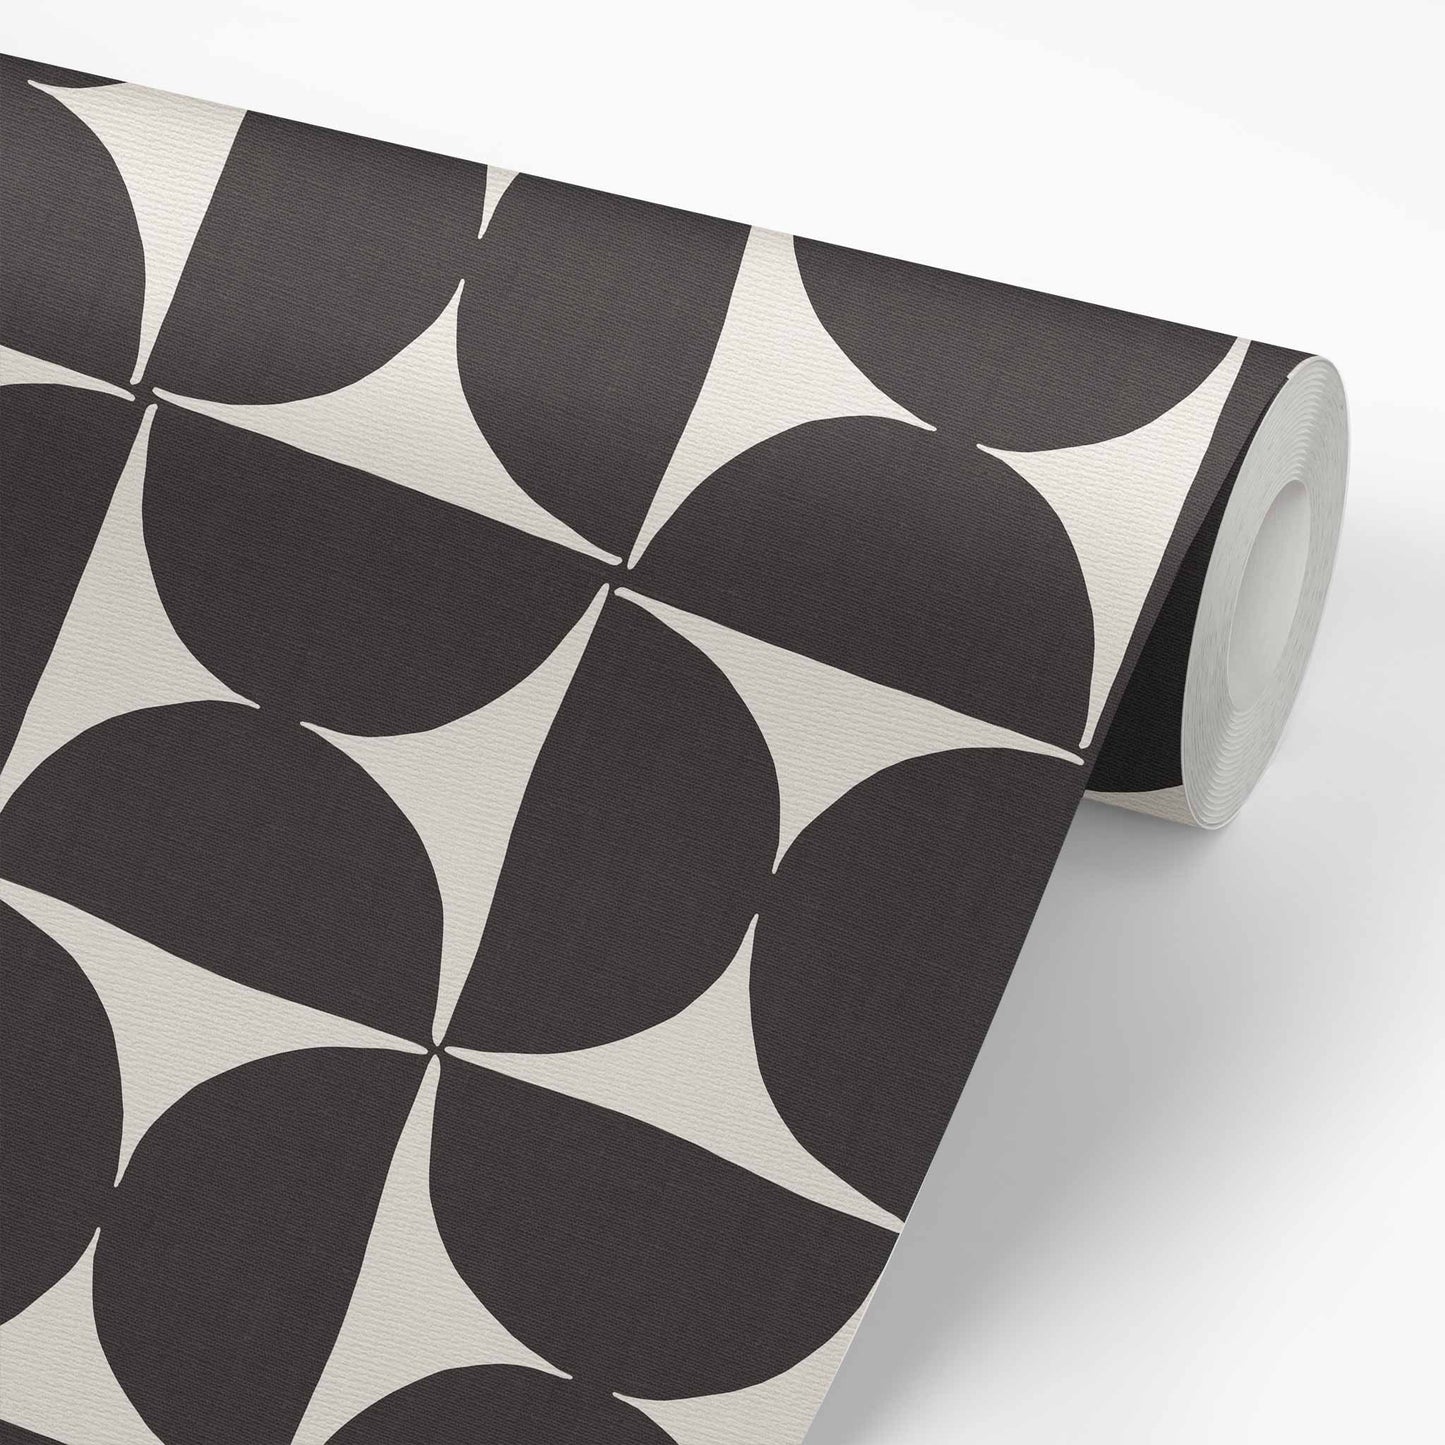 Get yourself these stylish Half Circle Tile Wallpapers for a unique wall decor solution. With its charcoal on cream design, these geometric wallpapers will easily liven up any room, making it look modern and chic.